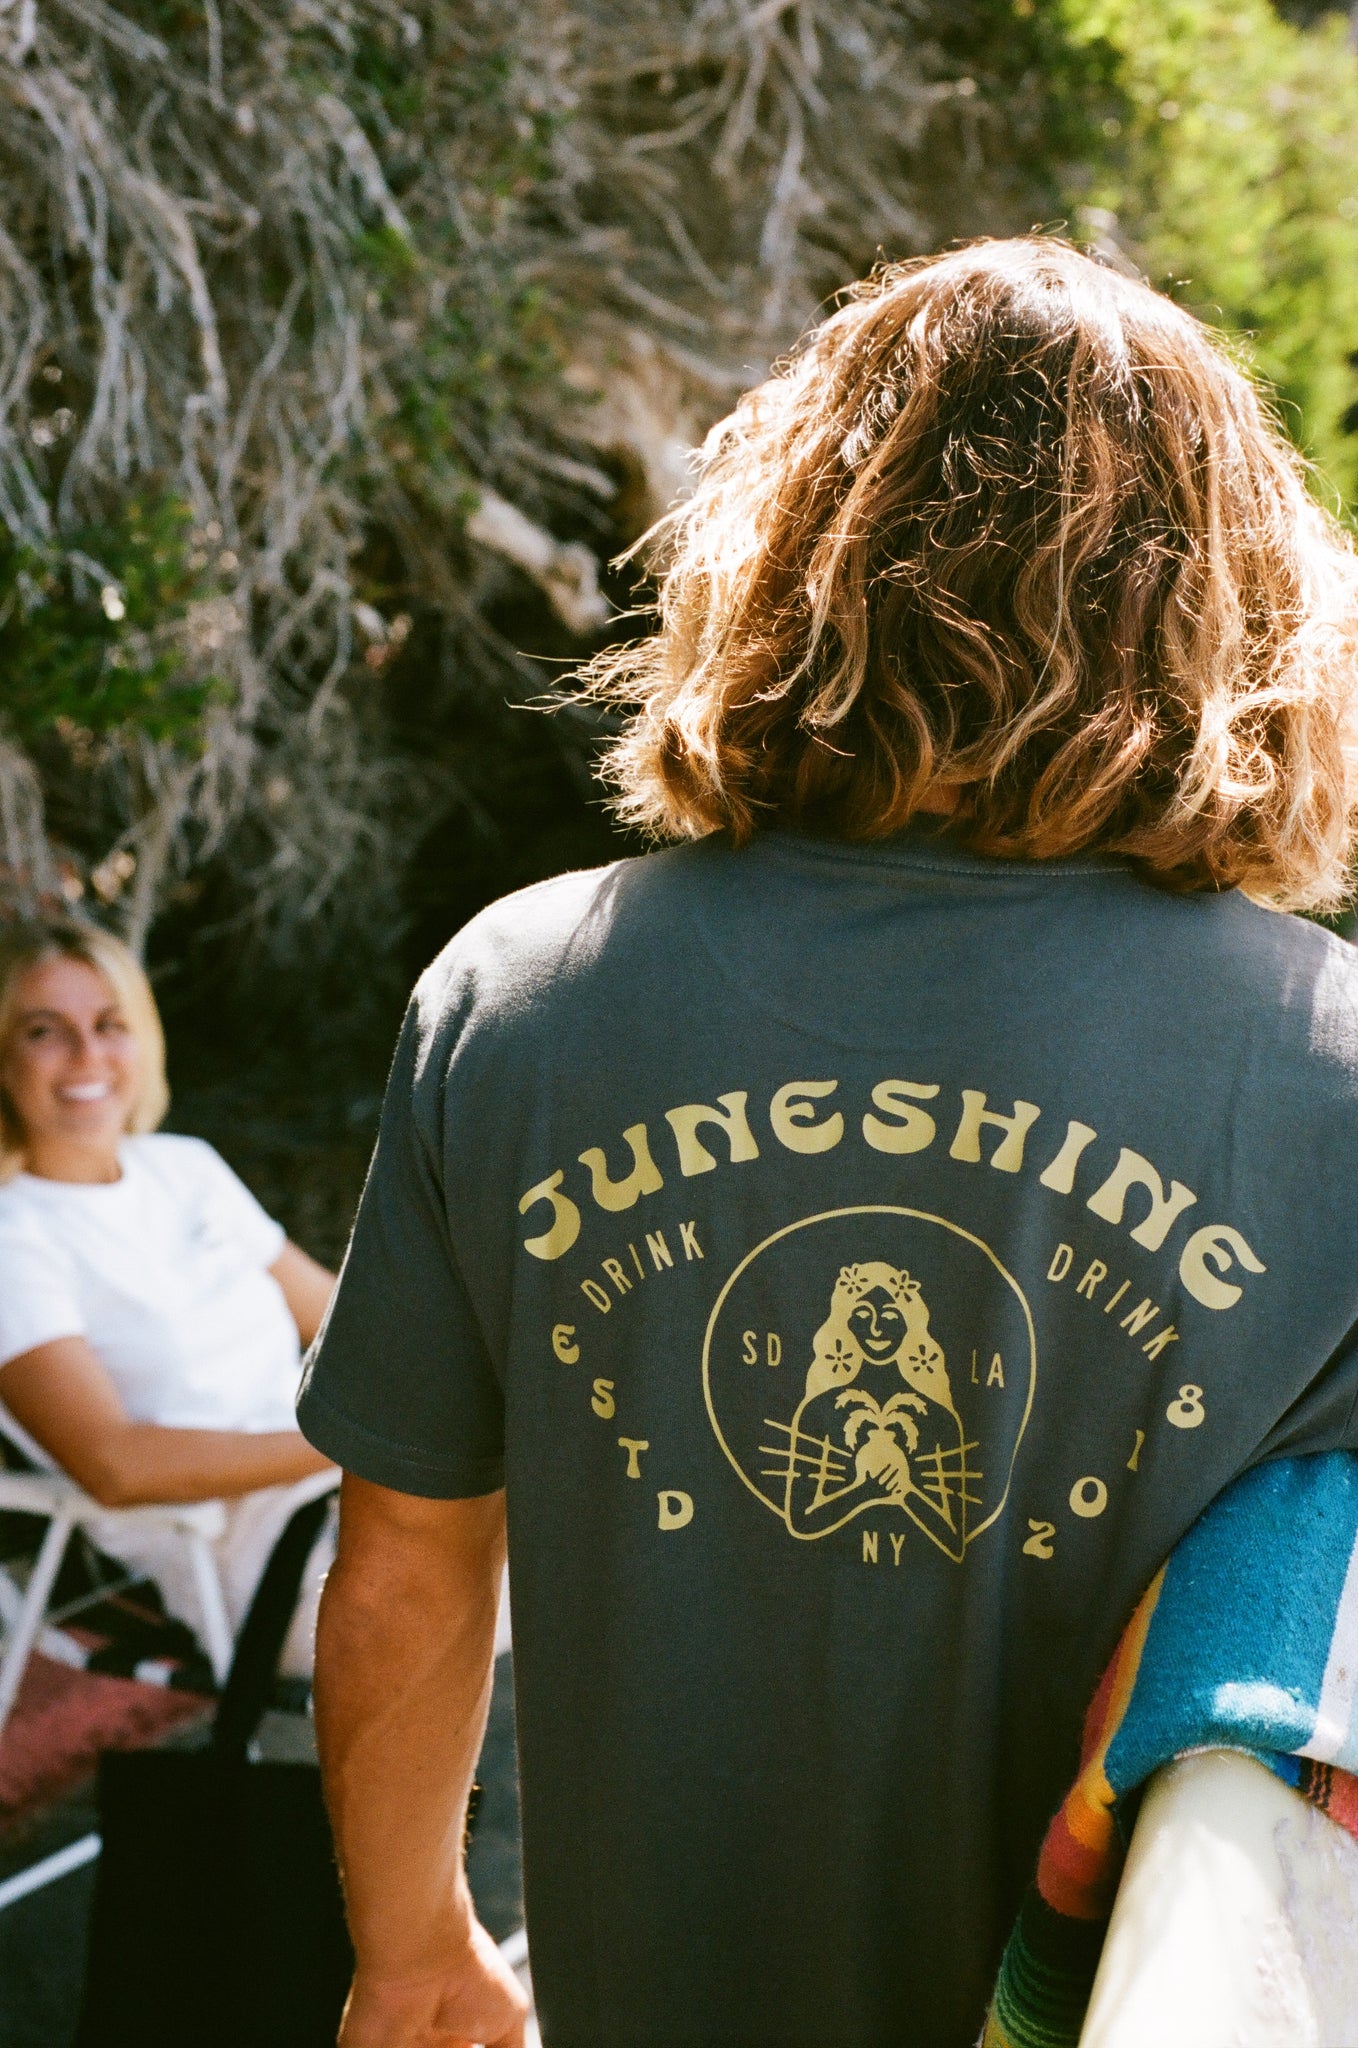 Long haired man wearing a black JuneShine tshirt that reads JuneShine, Estd 2018 in SD, NY, LA with image of a tropical woman holding a pineapple